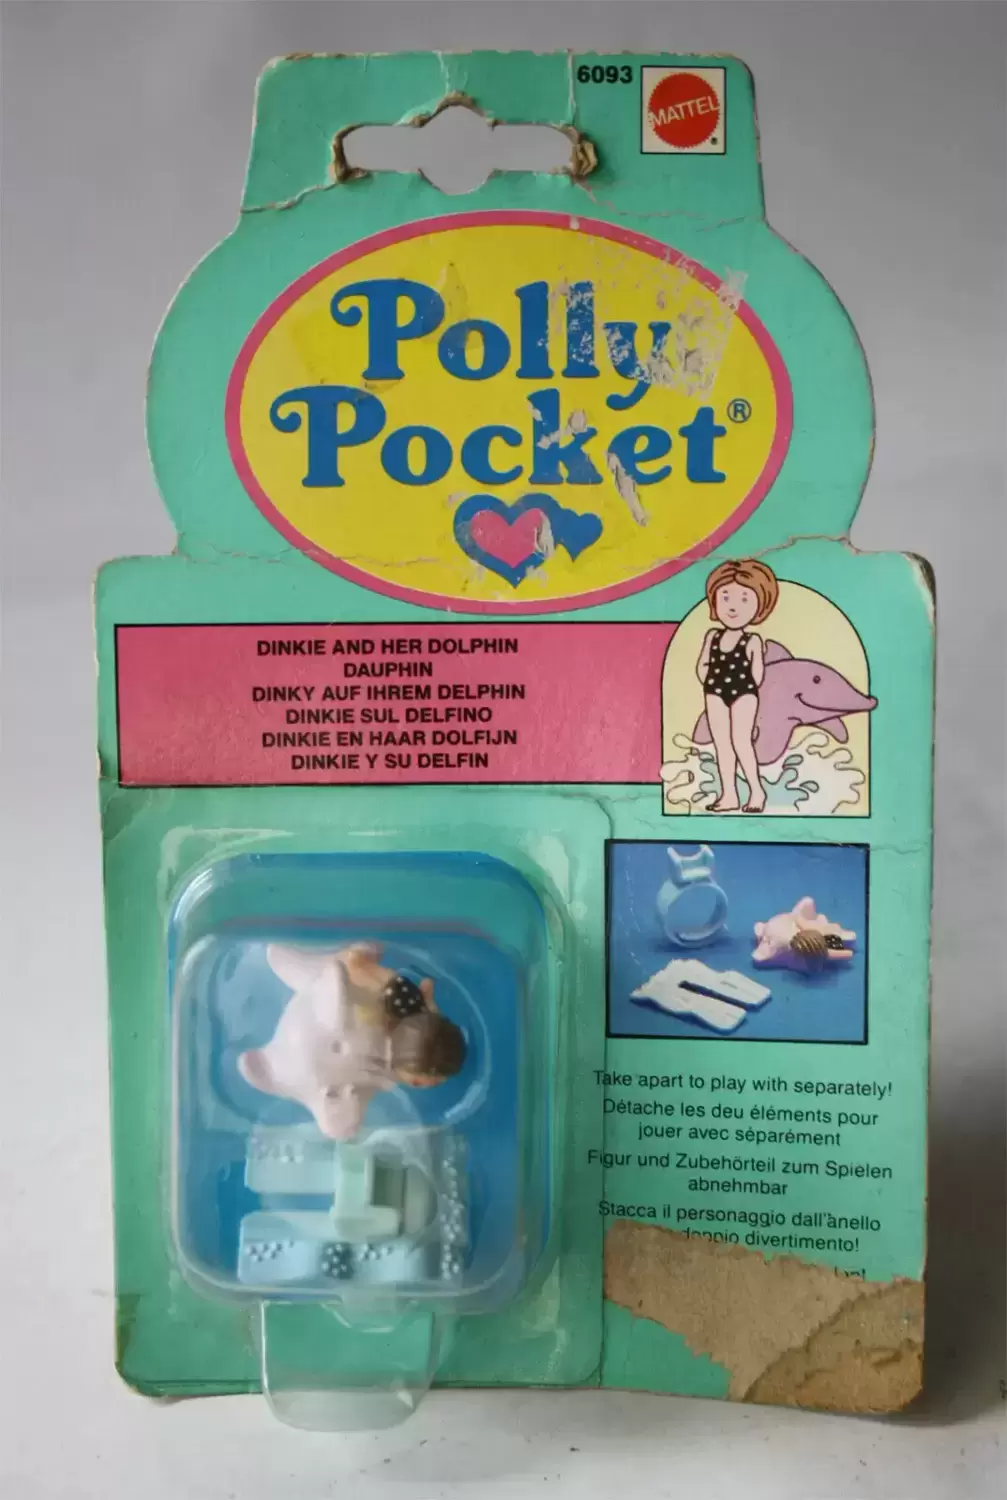 Polly Pocket (1989 - 1998) - Dinkie and Her Dolphin